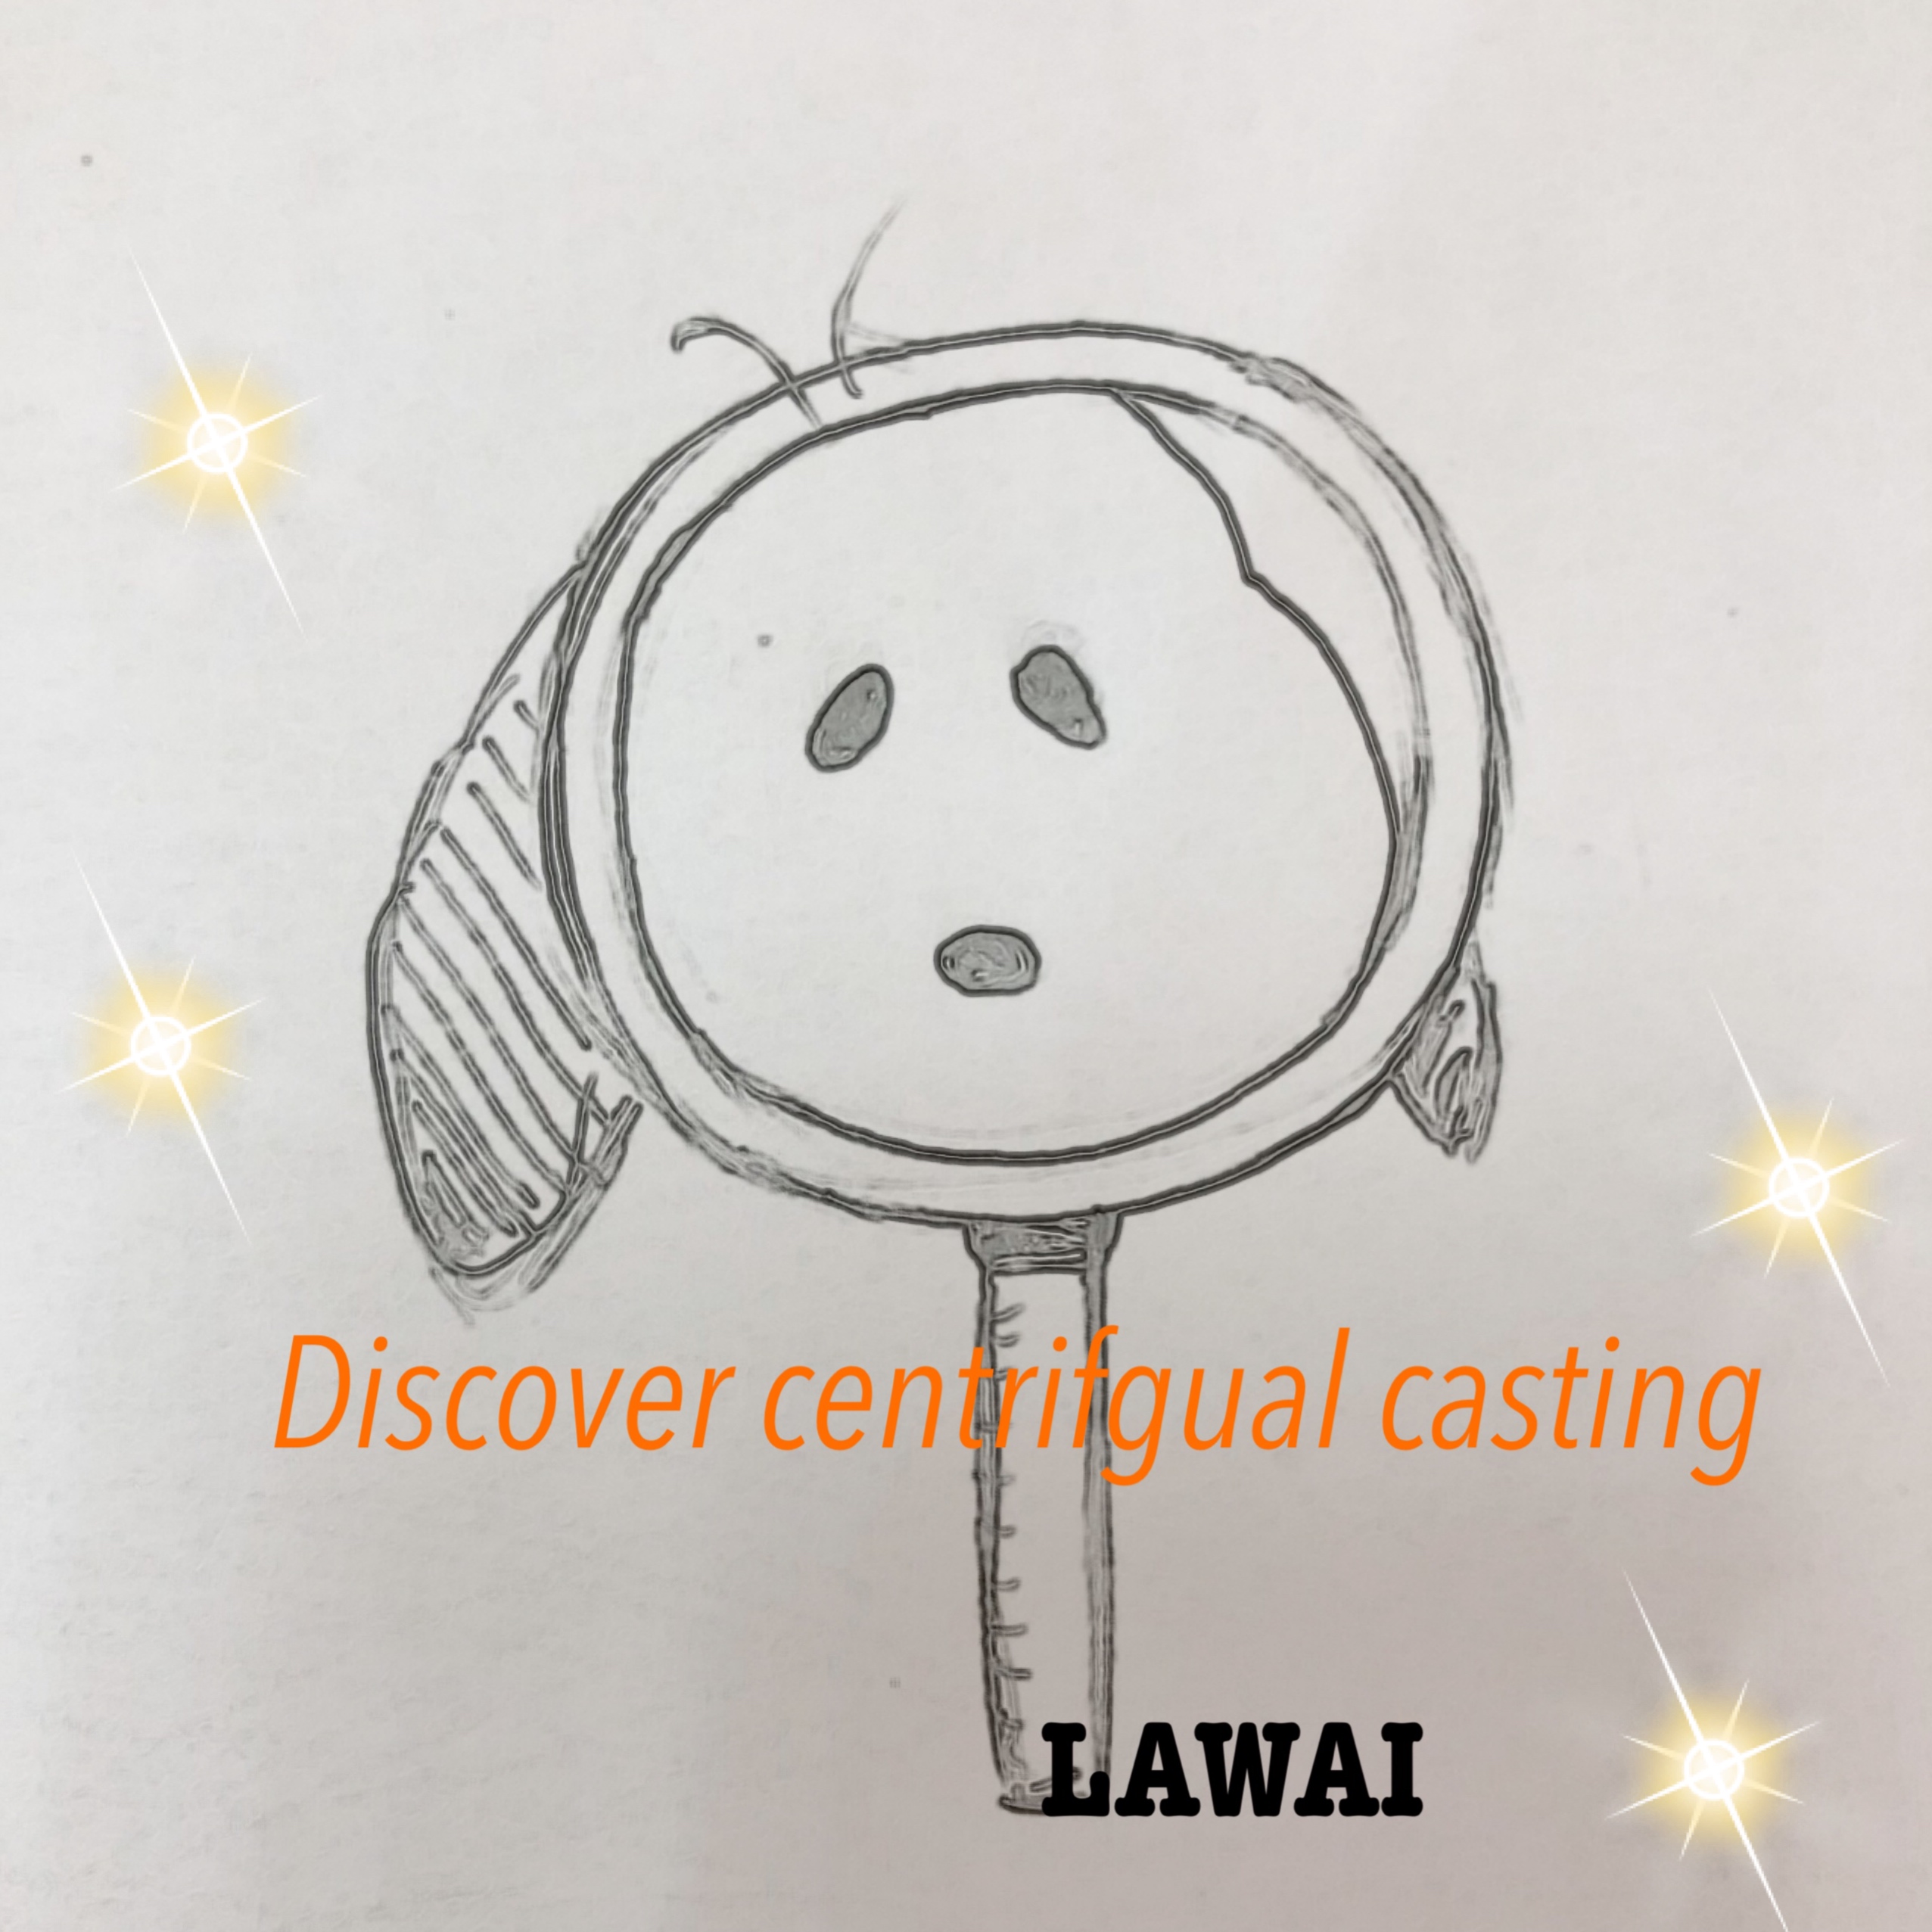 LAWAI INDUSTRIAL CORPORATION are keeping developing centrifugal castings